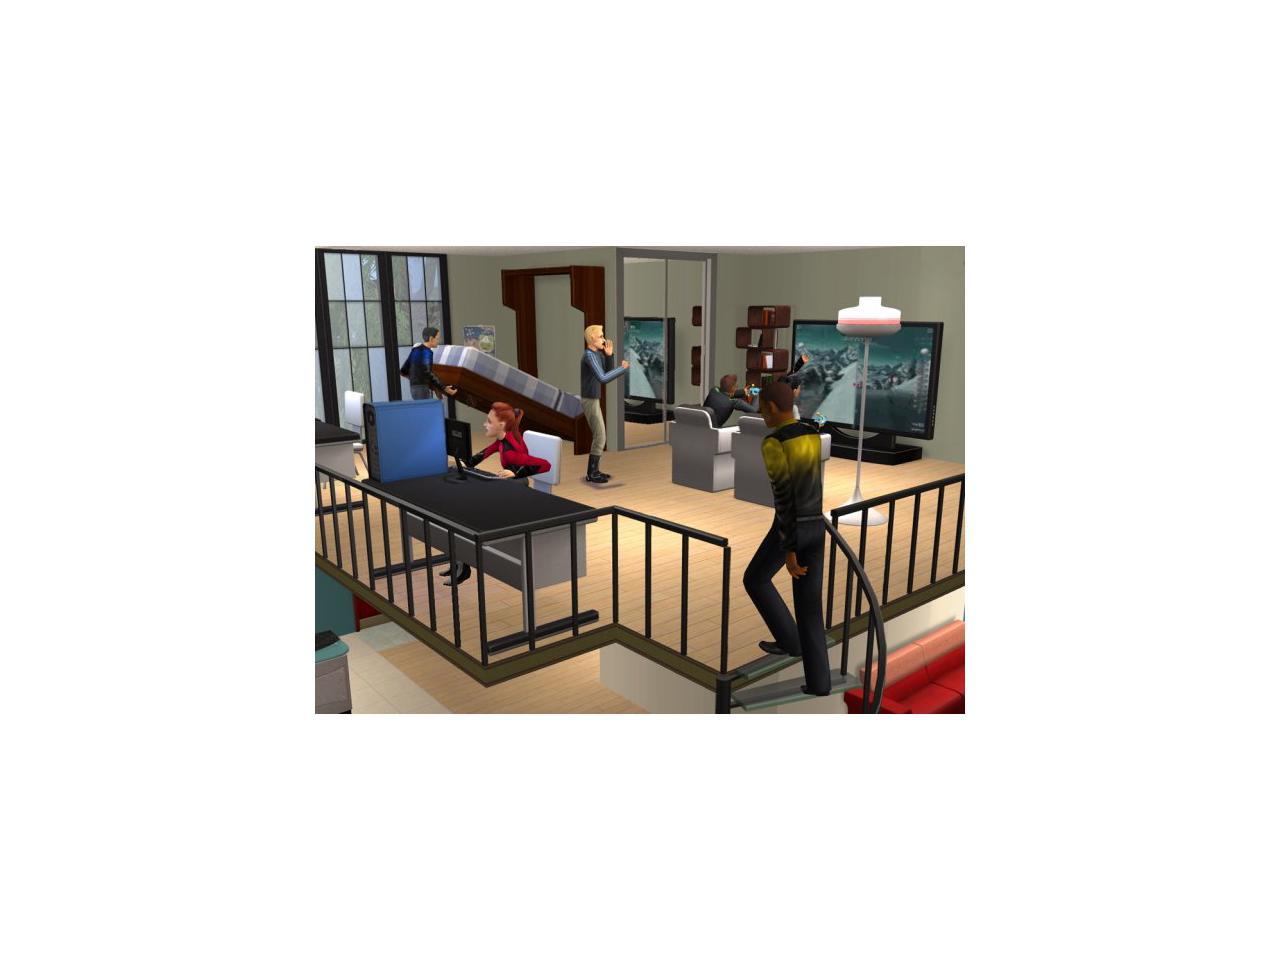 the sims 2 apartment life